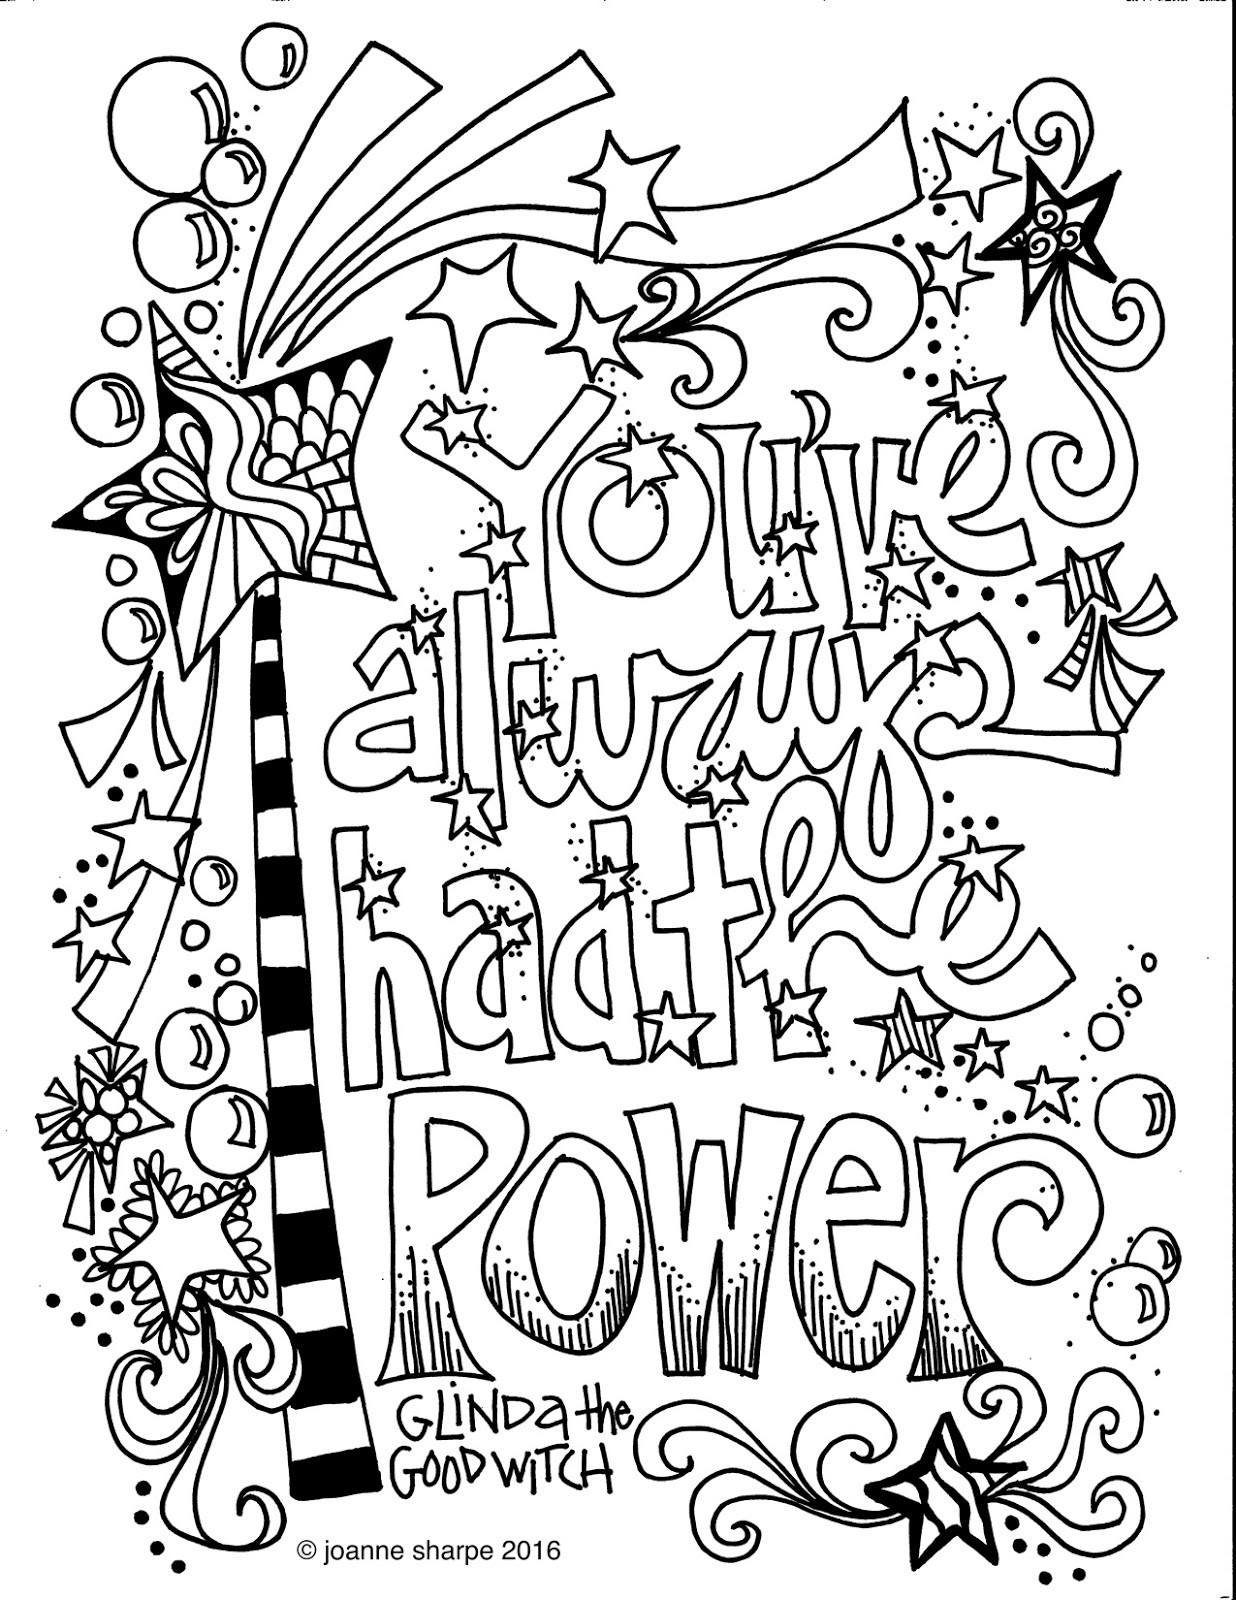 Quotes Coloring Pages For Adults
 Whimspirations WHIMSICAL WEDNESDAY "Color Power"